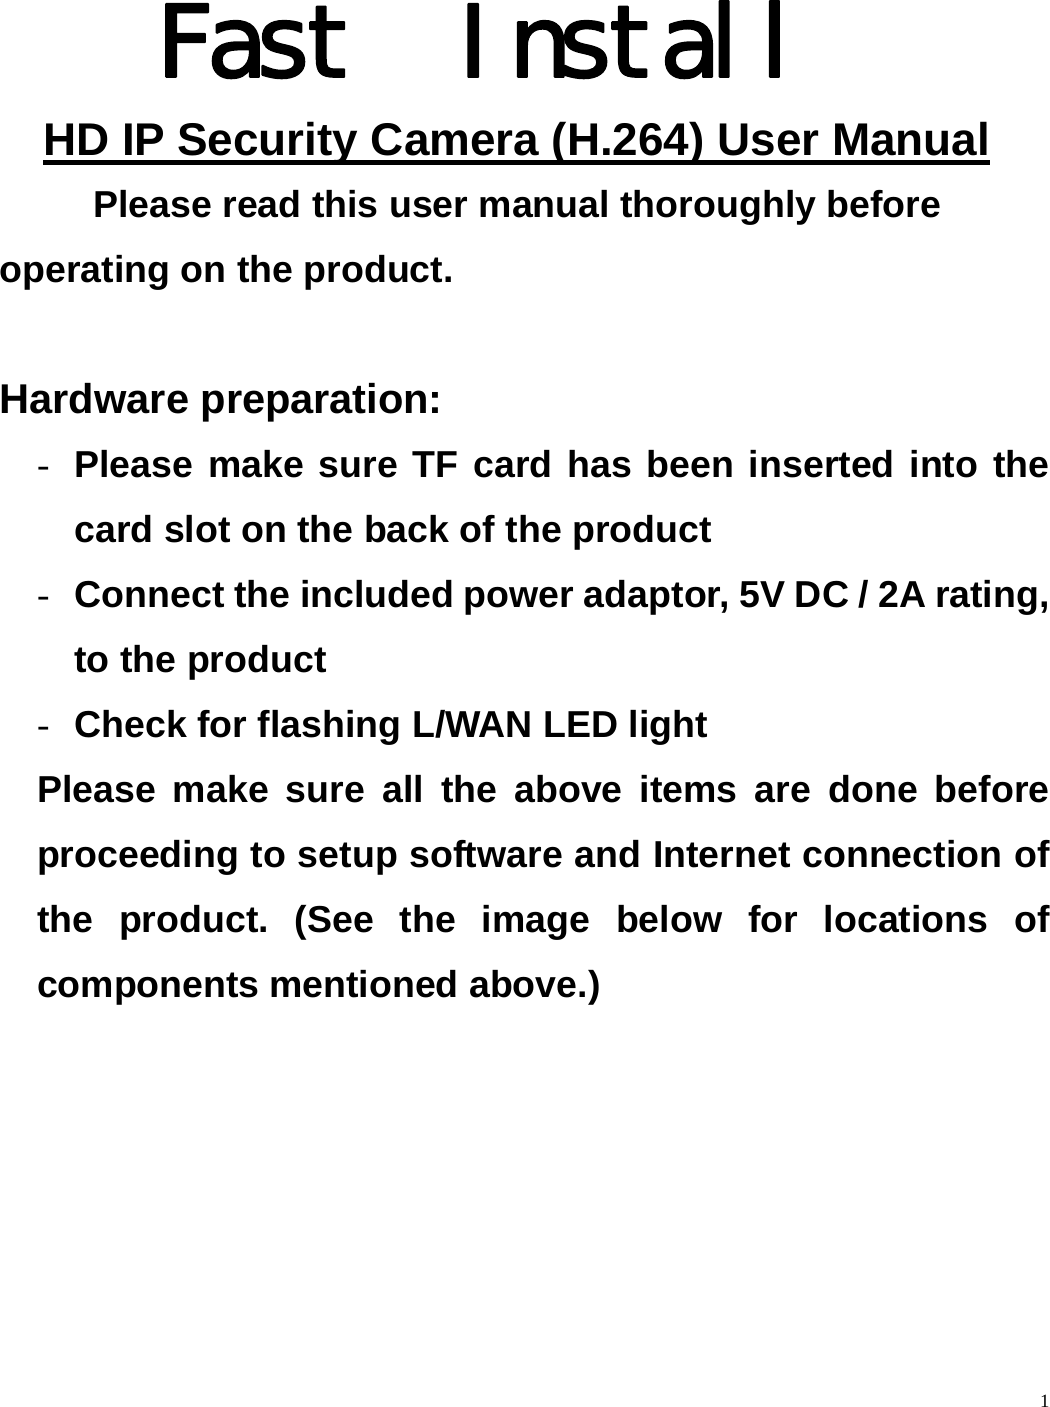    1            Fast  Install HD IP Security Camera (H.264) User Manual  Please read this user manual thoroughly before operating on the product.  Hardware preparation: - Please make sure TF card has been inserted into the card slot on the back of the product   - Connect the included power adaptor, 5V DC / 2A rating, to the product - Check for flashing L/WAN LED light Please make sure all the above items are done before proceeding to setup software and Internet connection of the product. (See the image below for locations of components mentioned above.) 